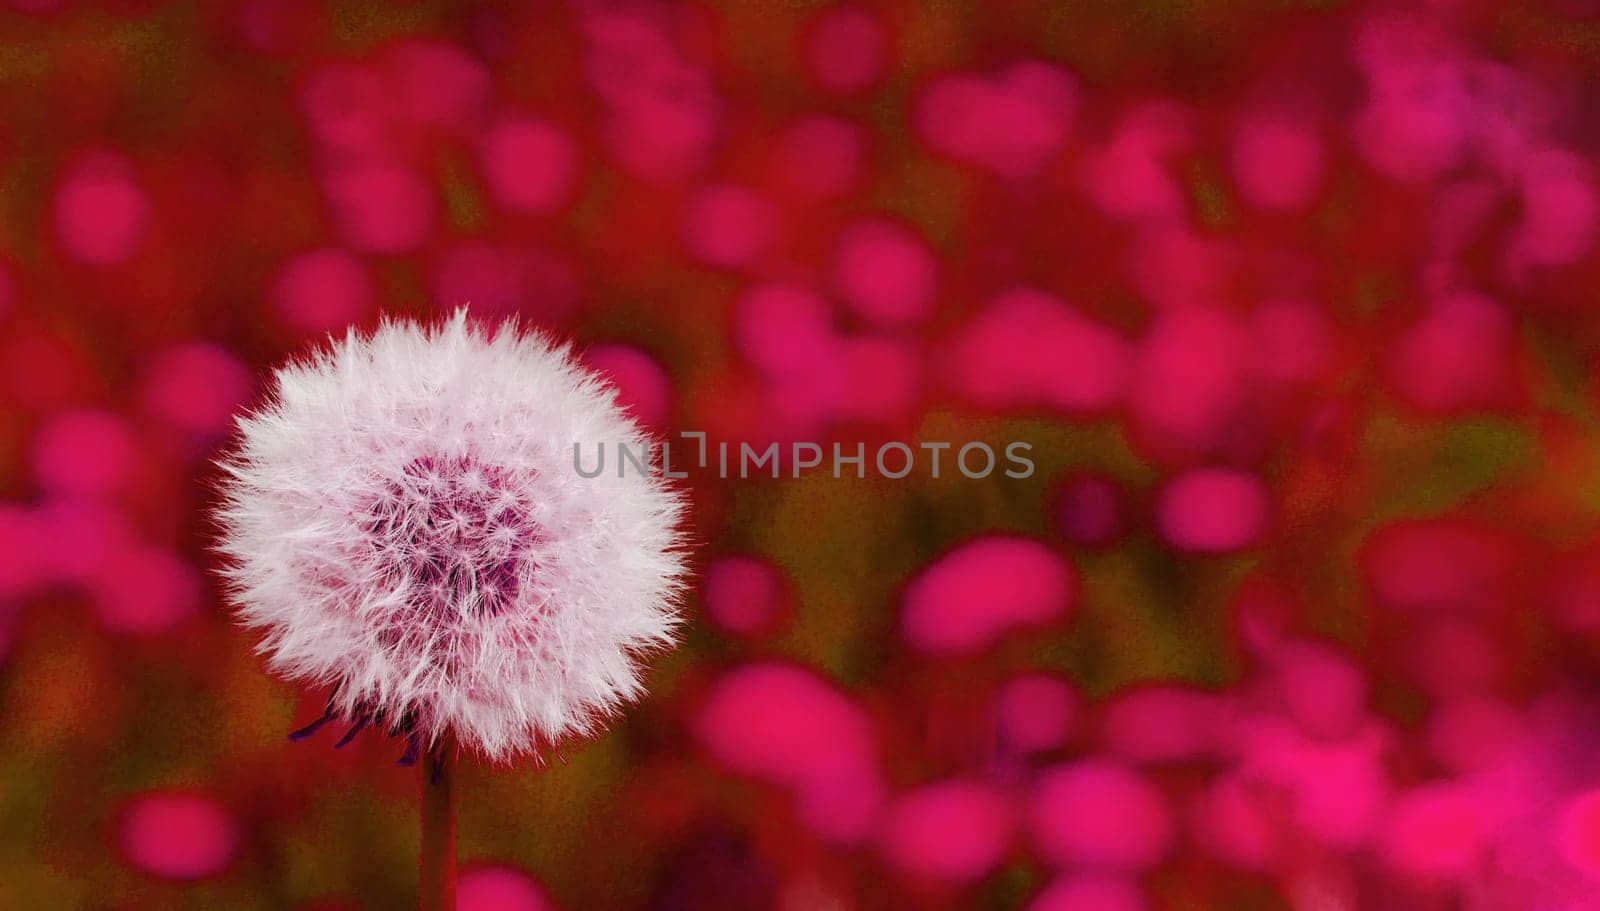 Abstract image of a dandelion.